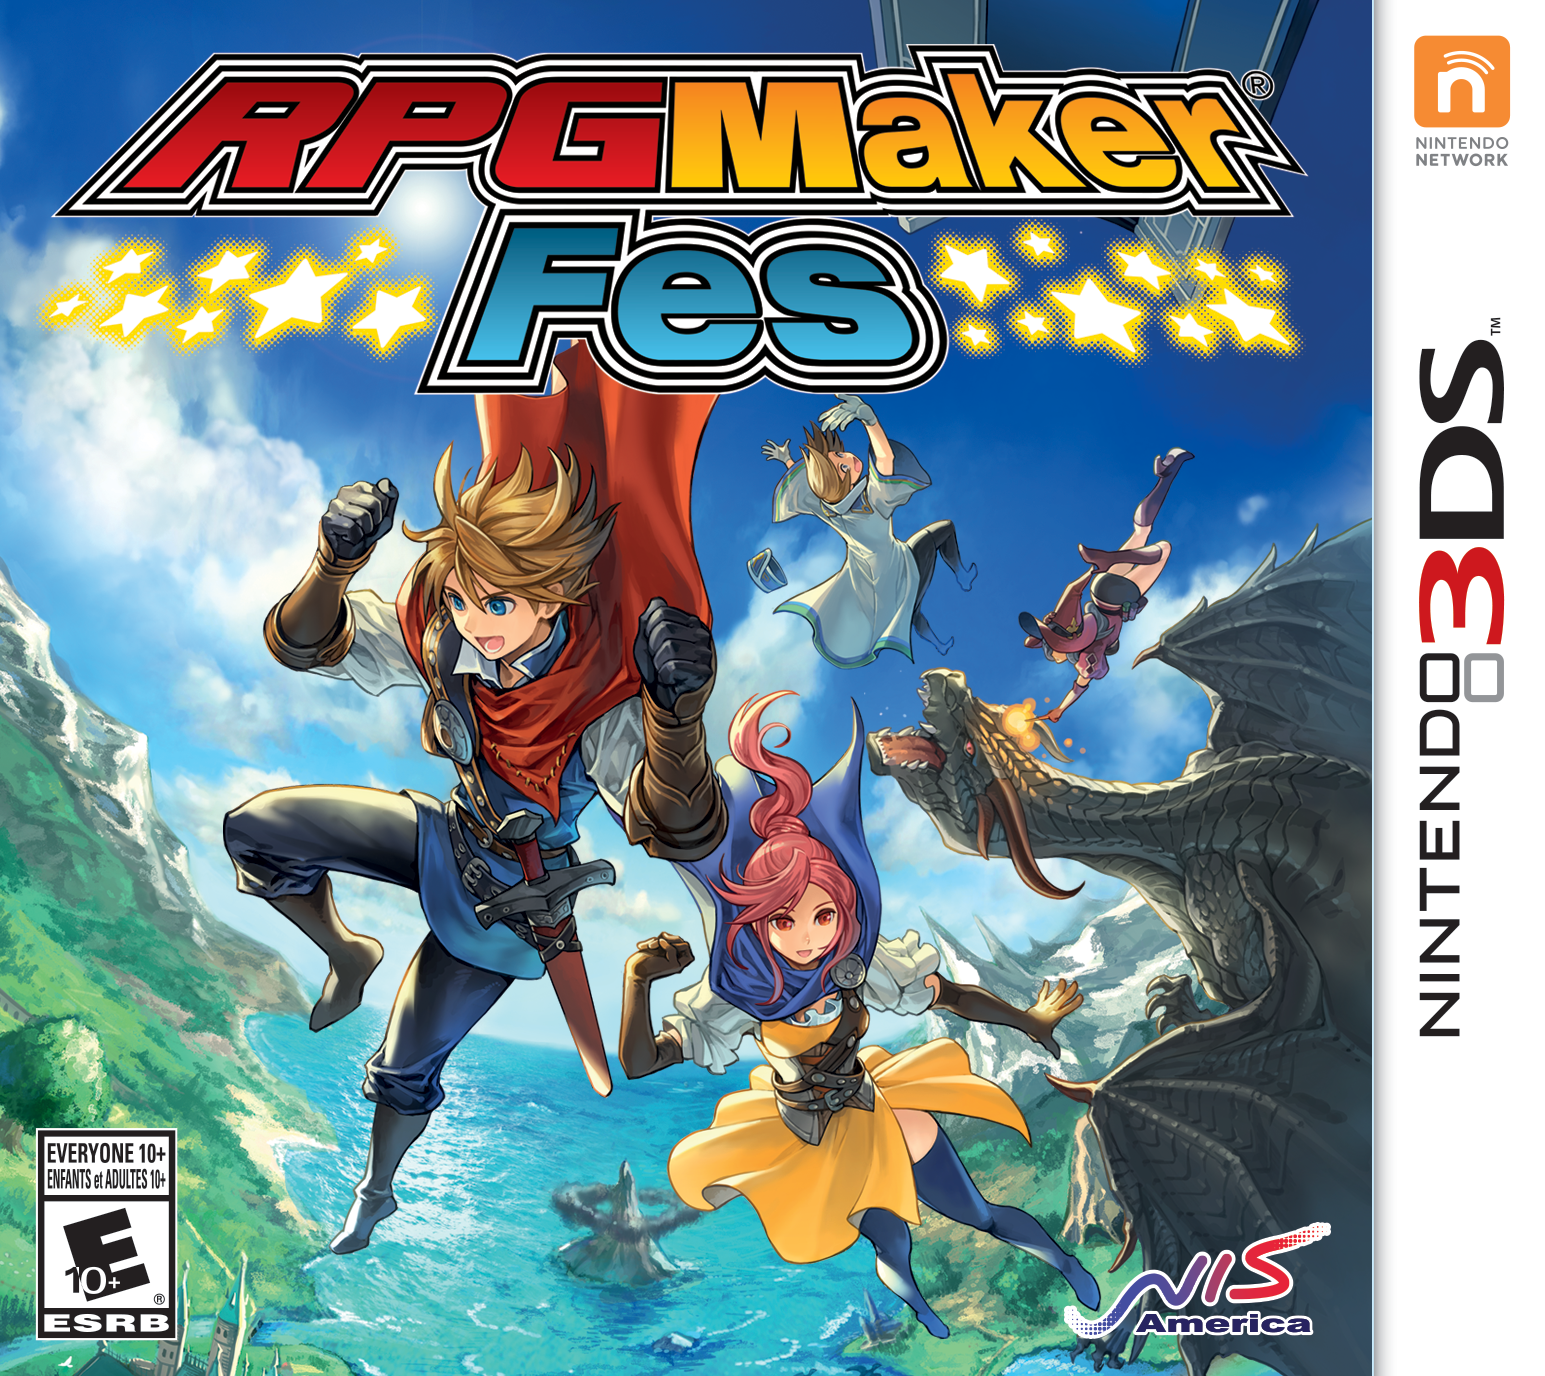 NIS America’s RPG Maker Fes coming to the West on June 27